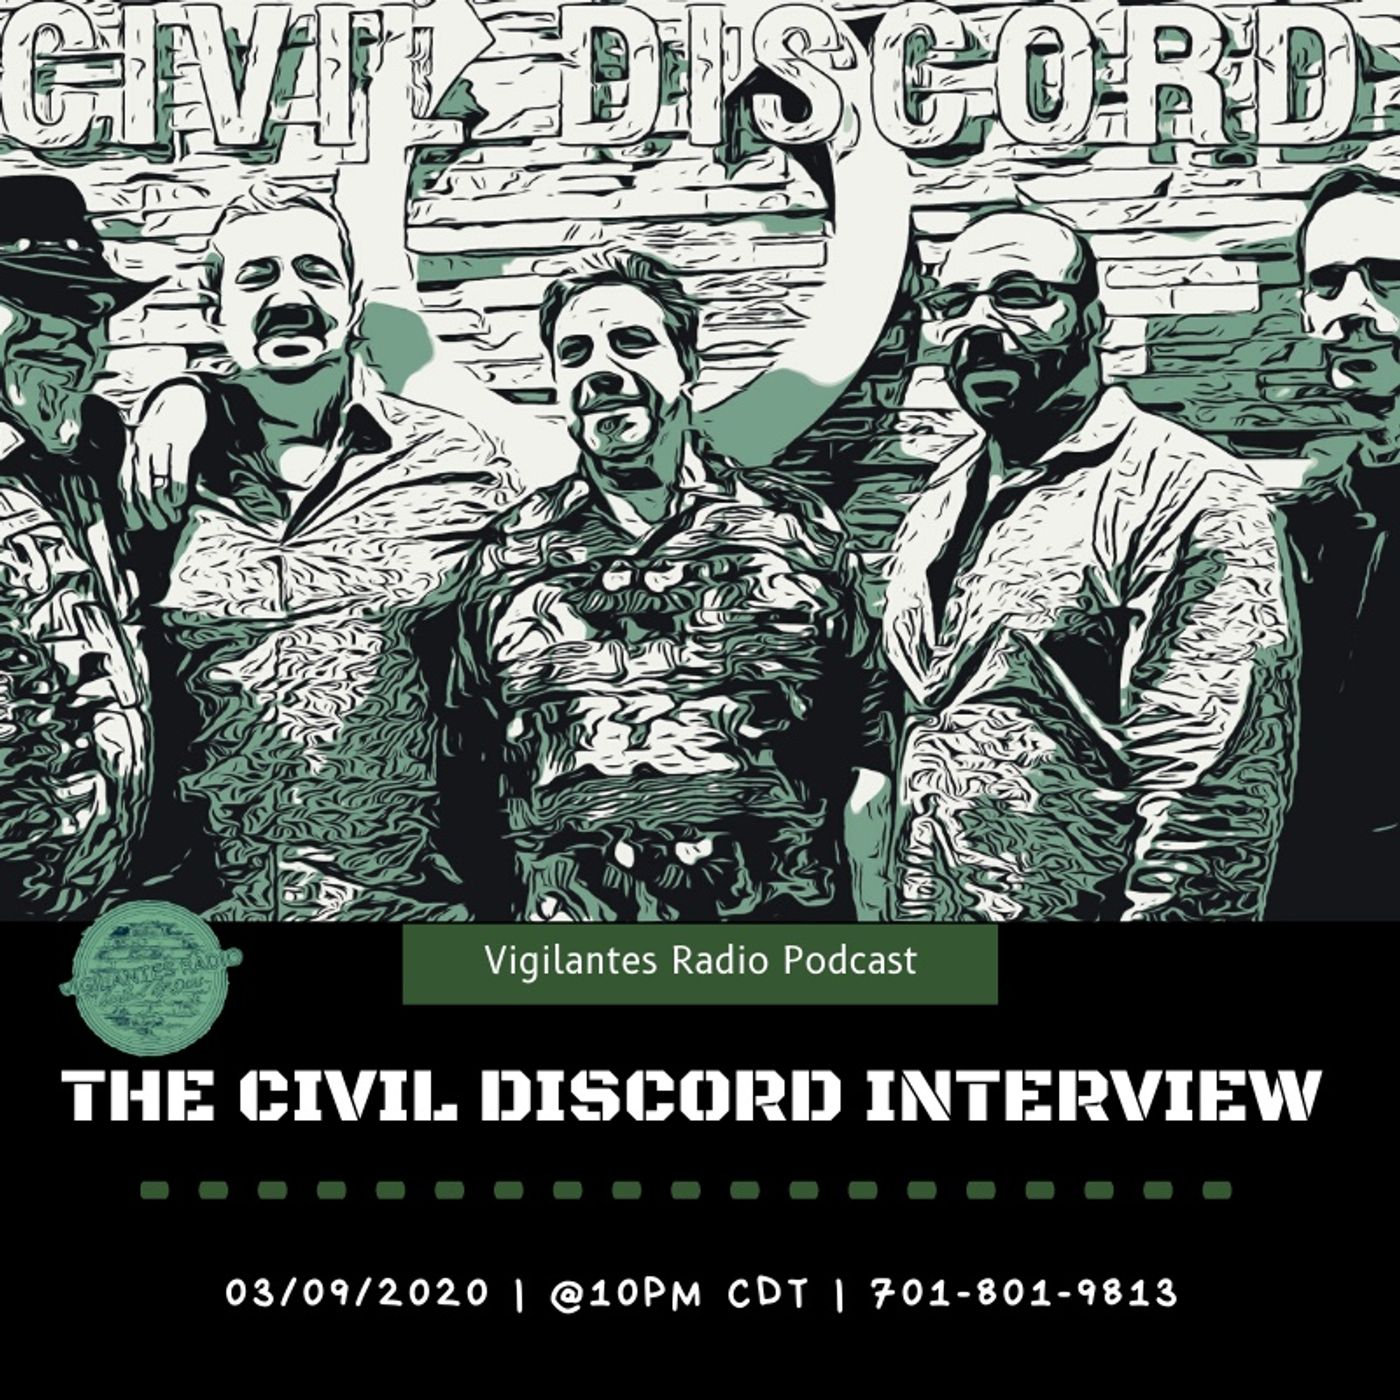 The Civil Discord Interview. Image